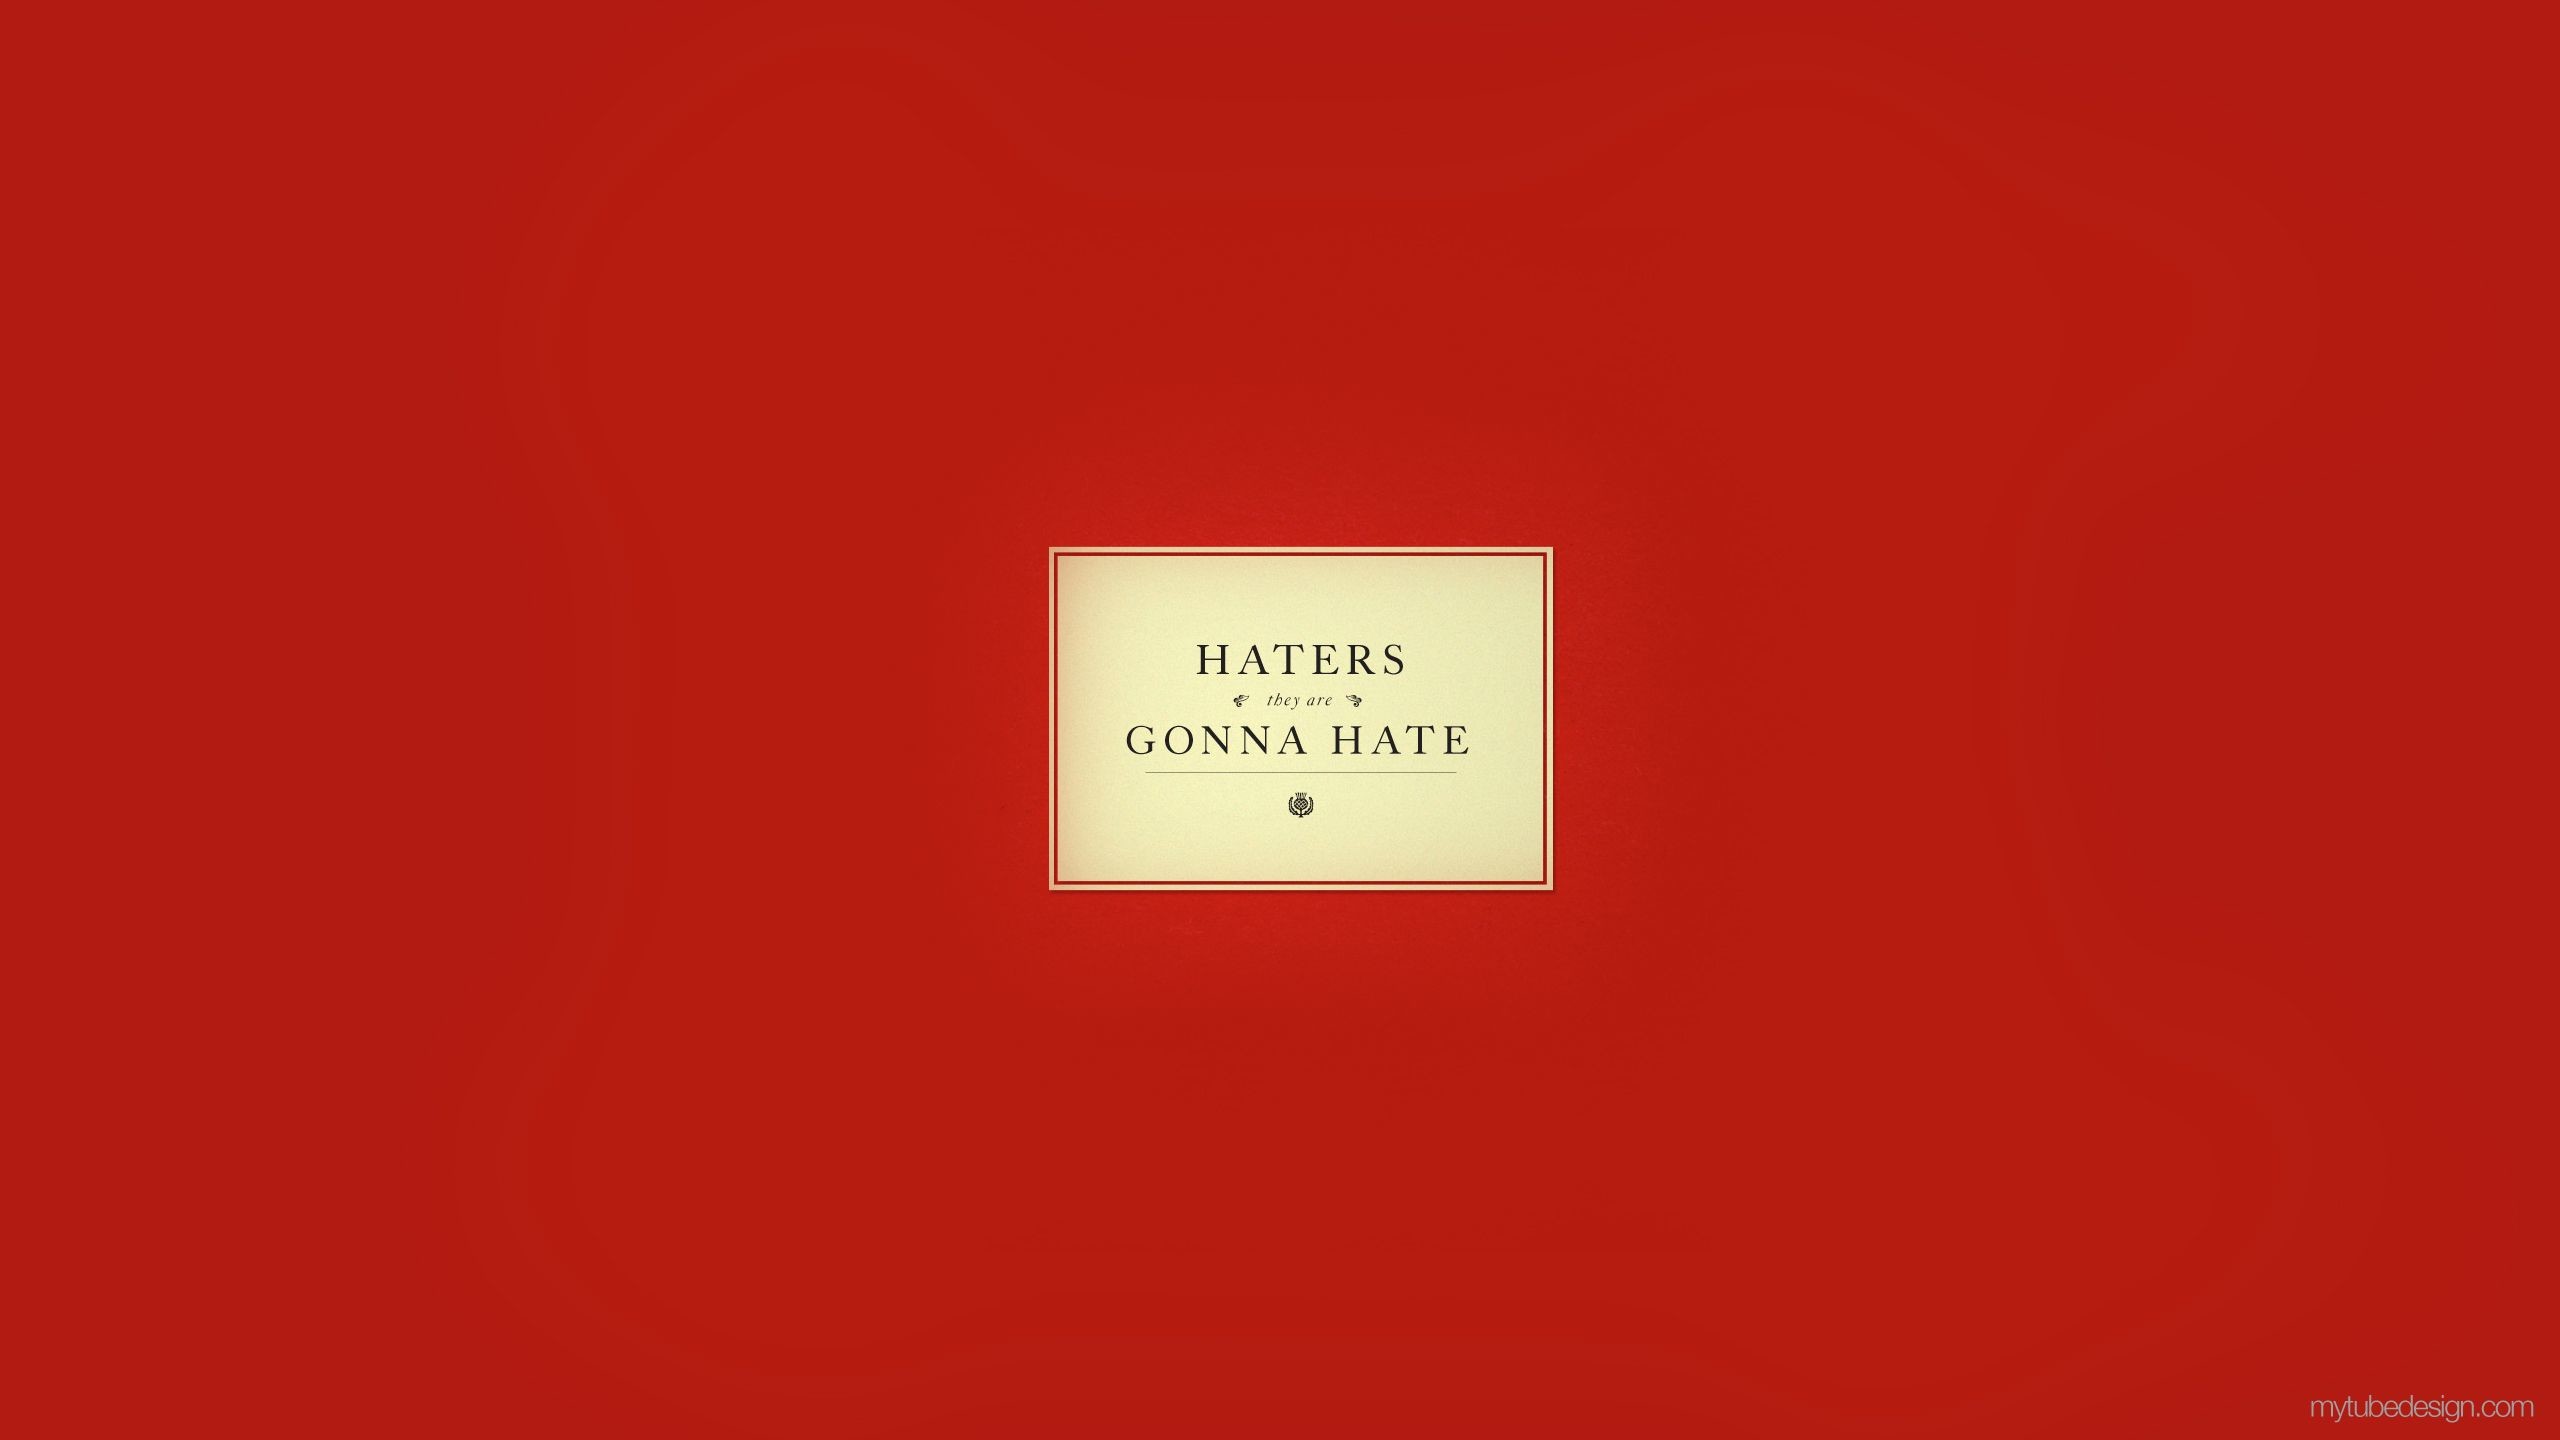  Haters Wallpapers on WallpaperPlay